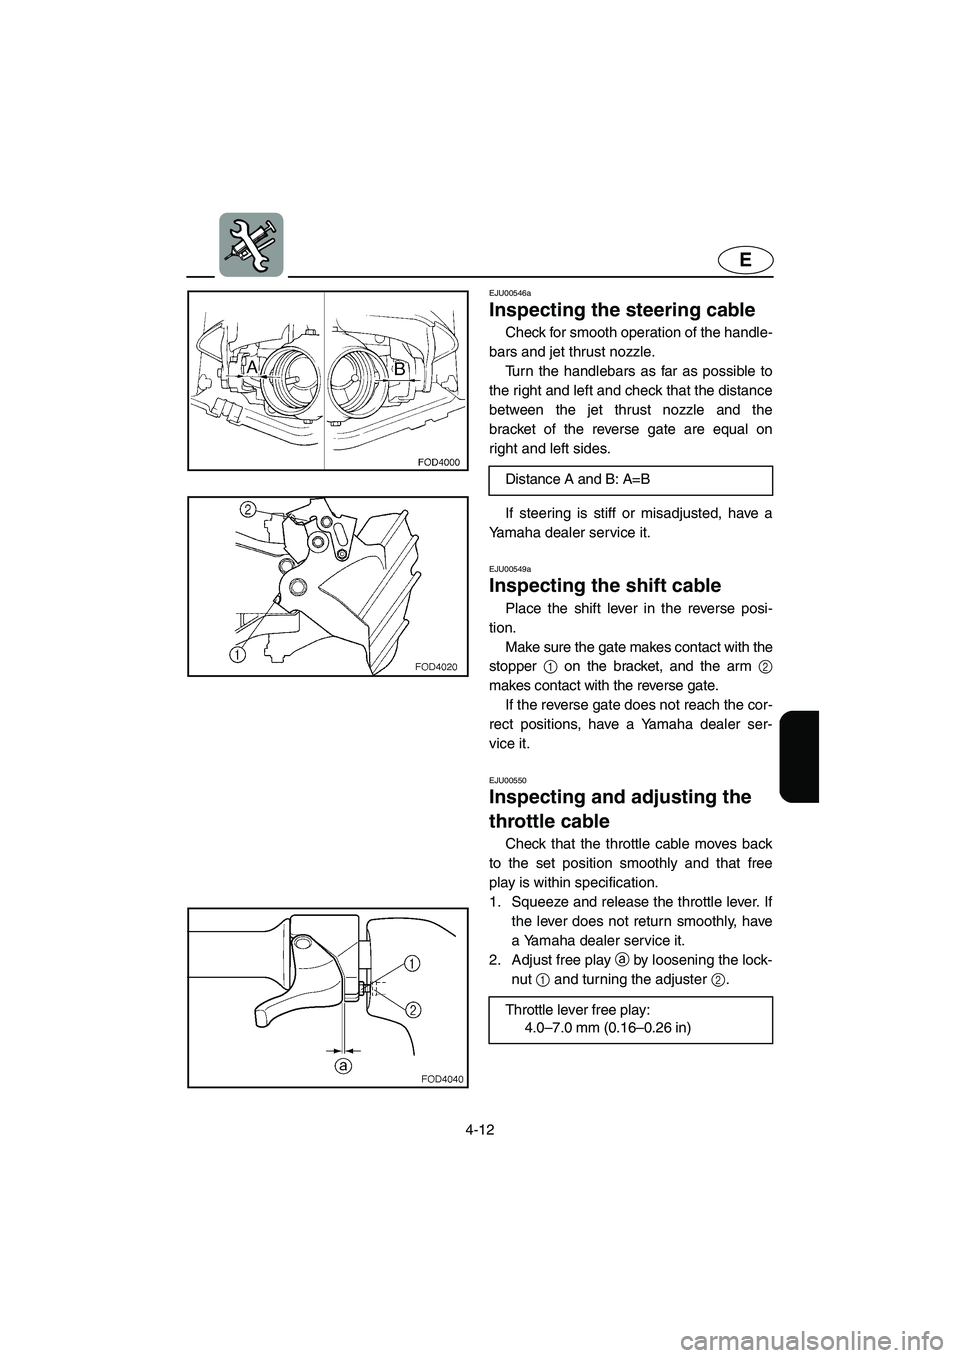 YAMAHA XL 800 2001  Owners Manual 4-12
E
EJU00546a
Inspecting the steering cable
Check for smooth operation of the handle-
bars and jet thrust nozzle.
Turn the handlebars as far as possible to
the right and left and check that the dis